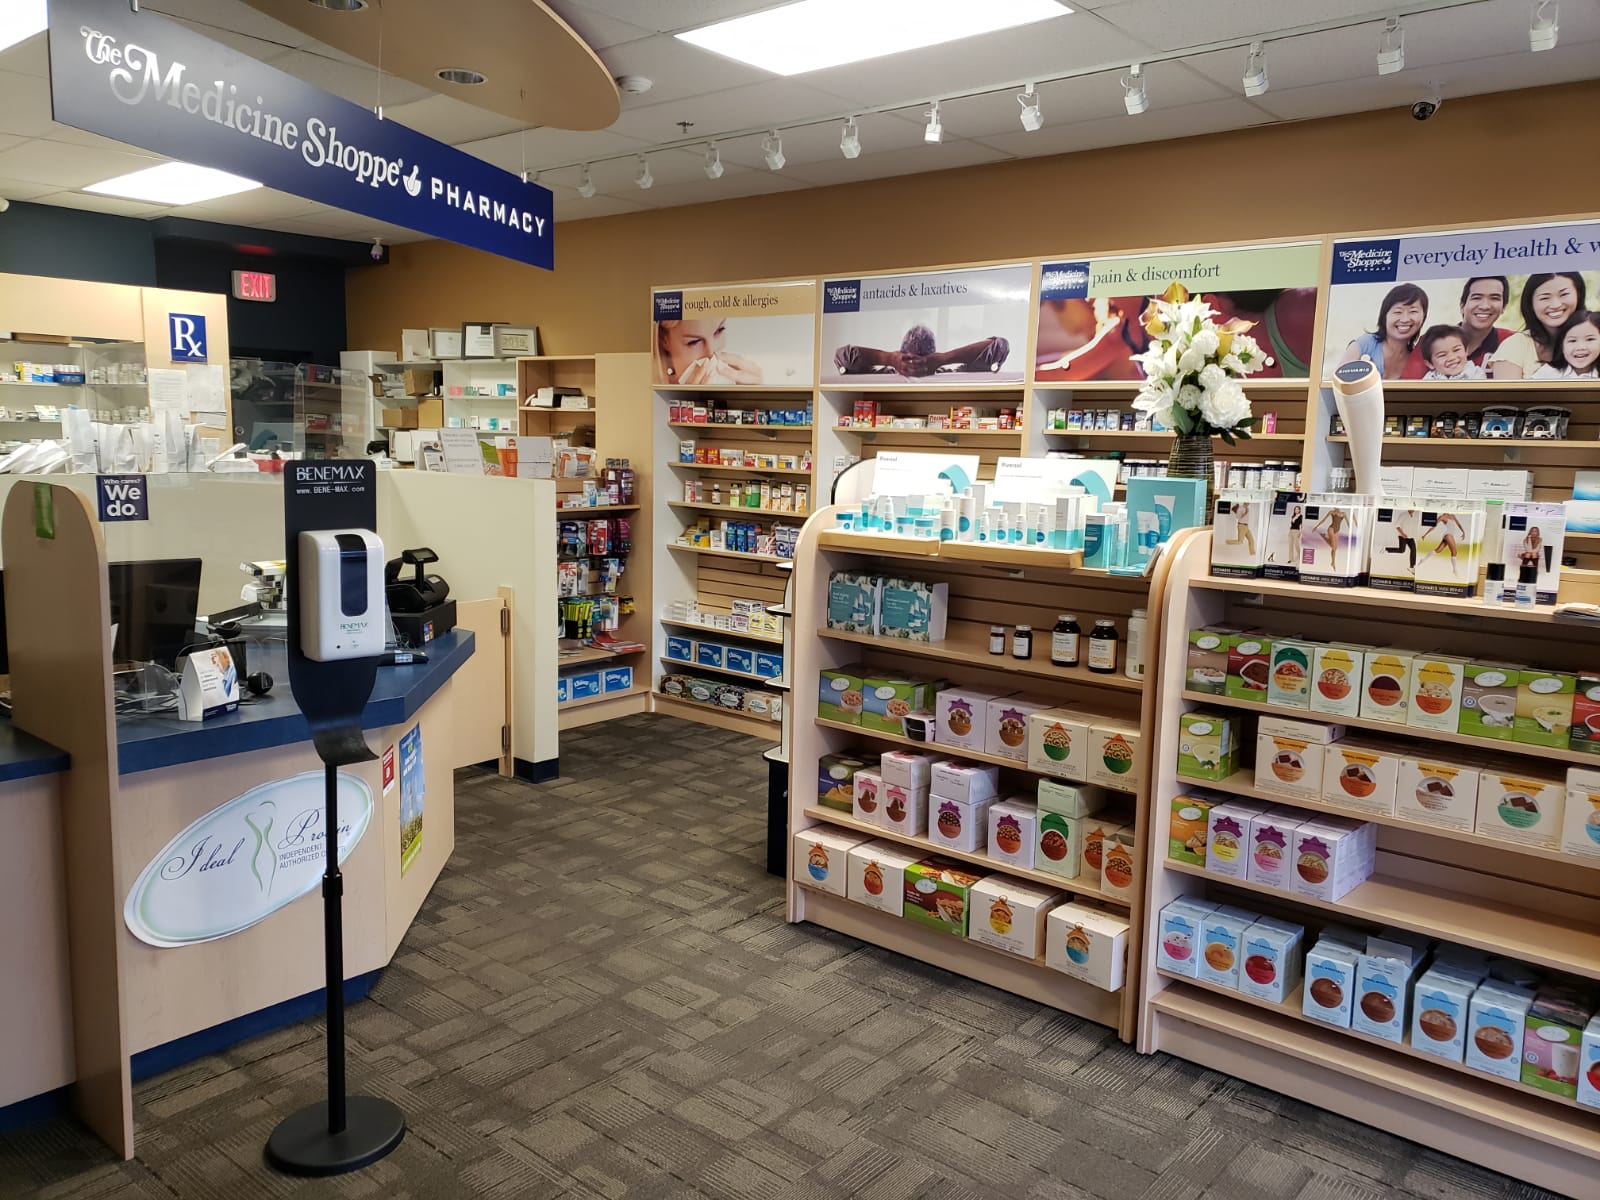 Medicine Shoppe Pharmacy, Lakeshore road, Kelowna is a patient focused compounding pharmacy. We offer quick prescription service in addition to compounding medications, blister packaging, professional supplements, and medication reviews. Get in touch.